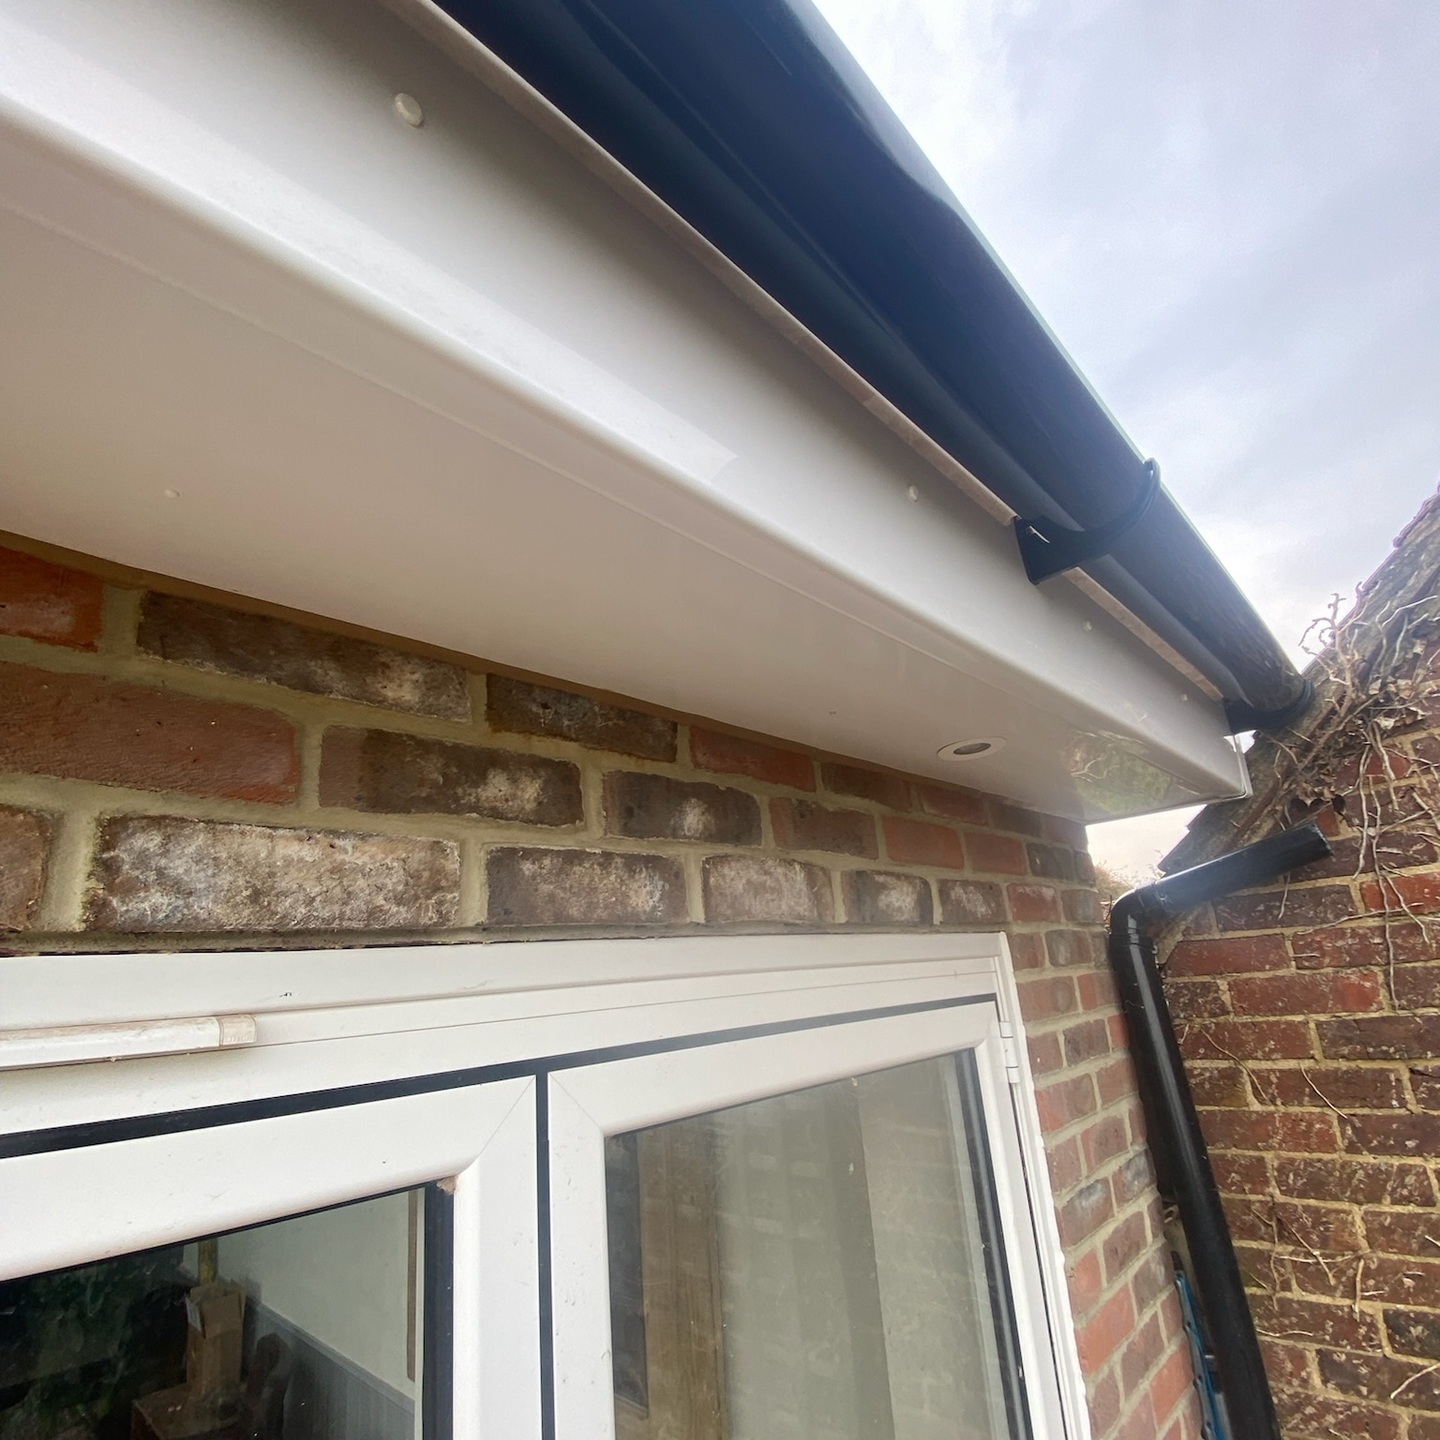 Mastic applied to the exterior fascia